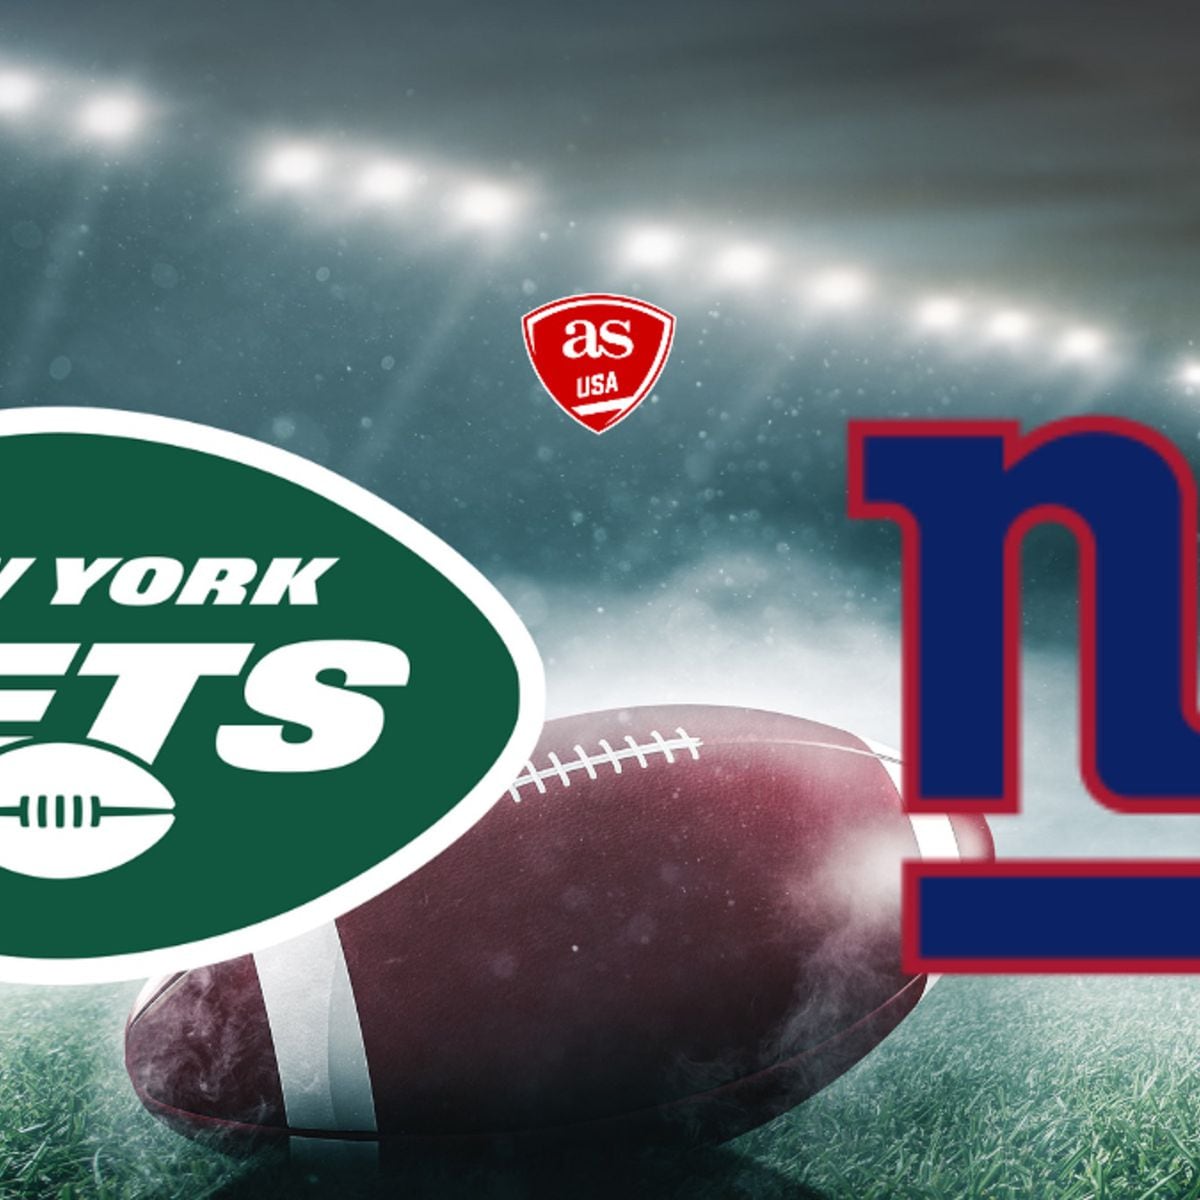 New York Jets vs New York Giants: times, how to watch on TV